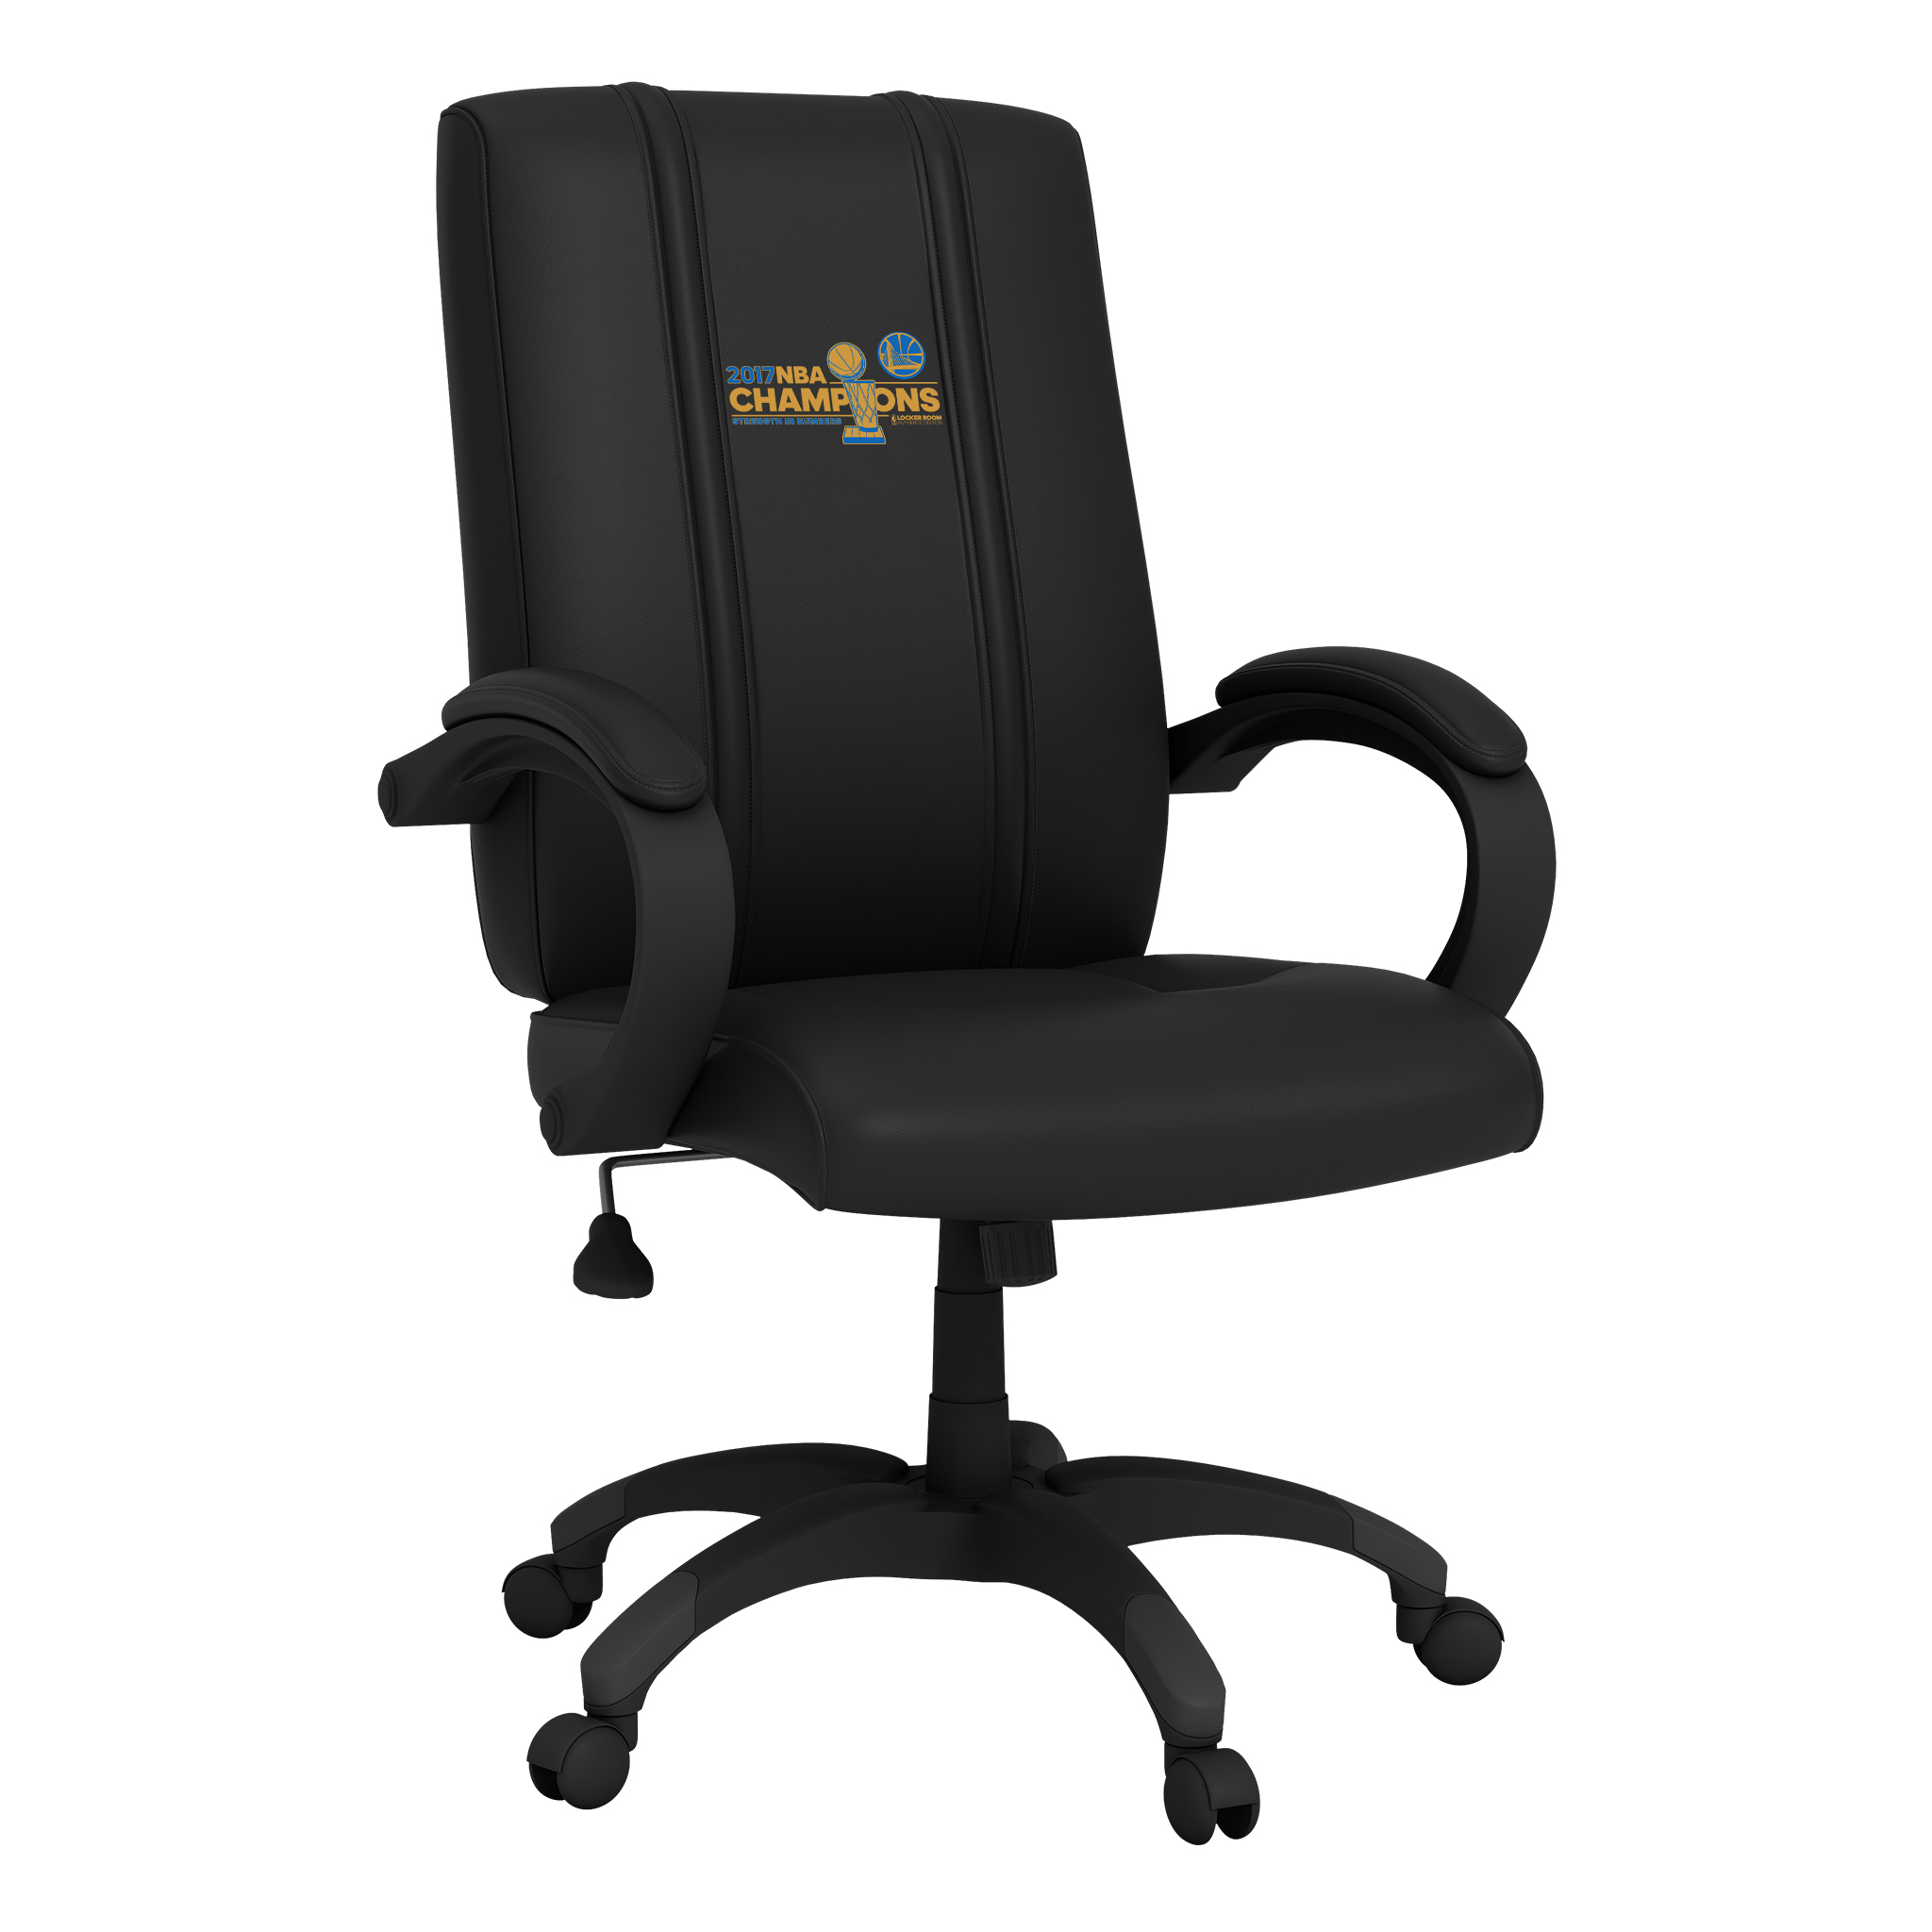 Golden State Warriors Office Chair 1000 with Golden State Warriors Champions Logo